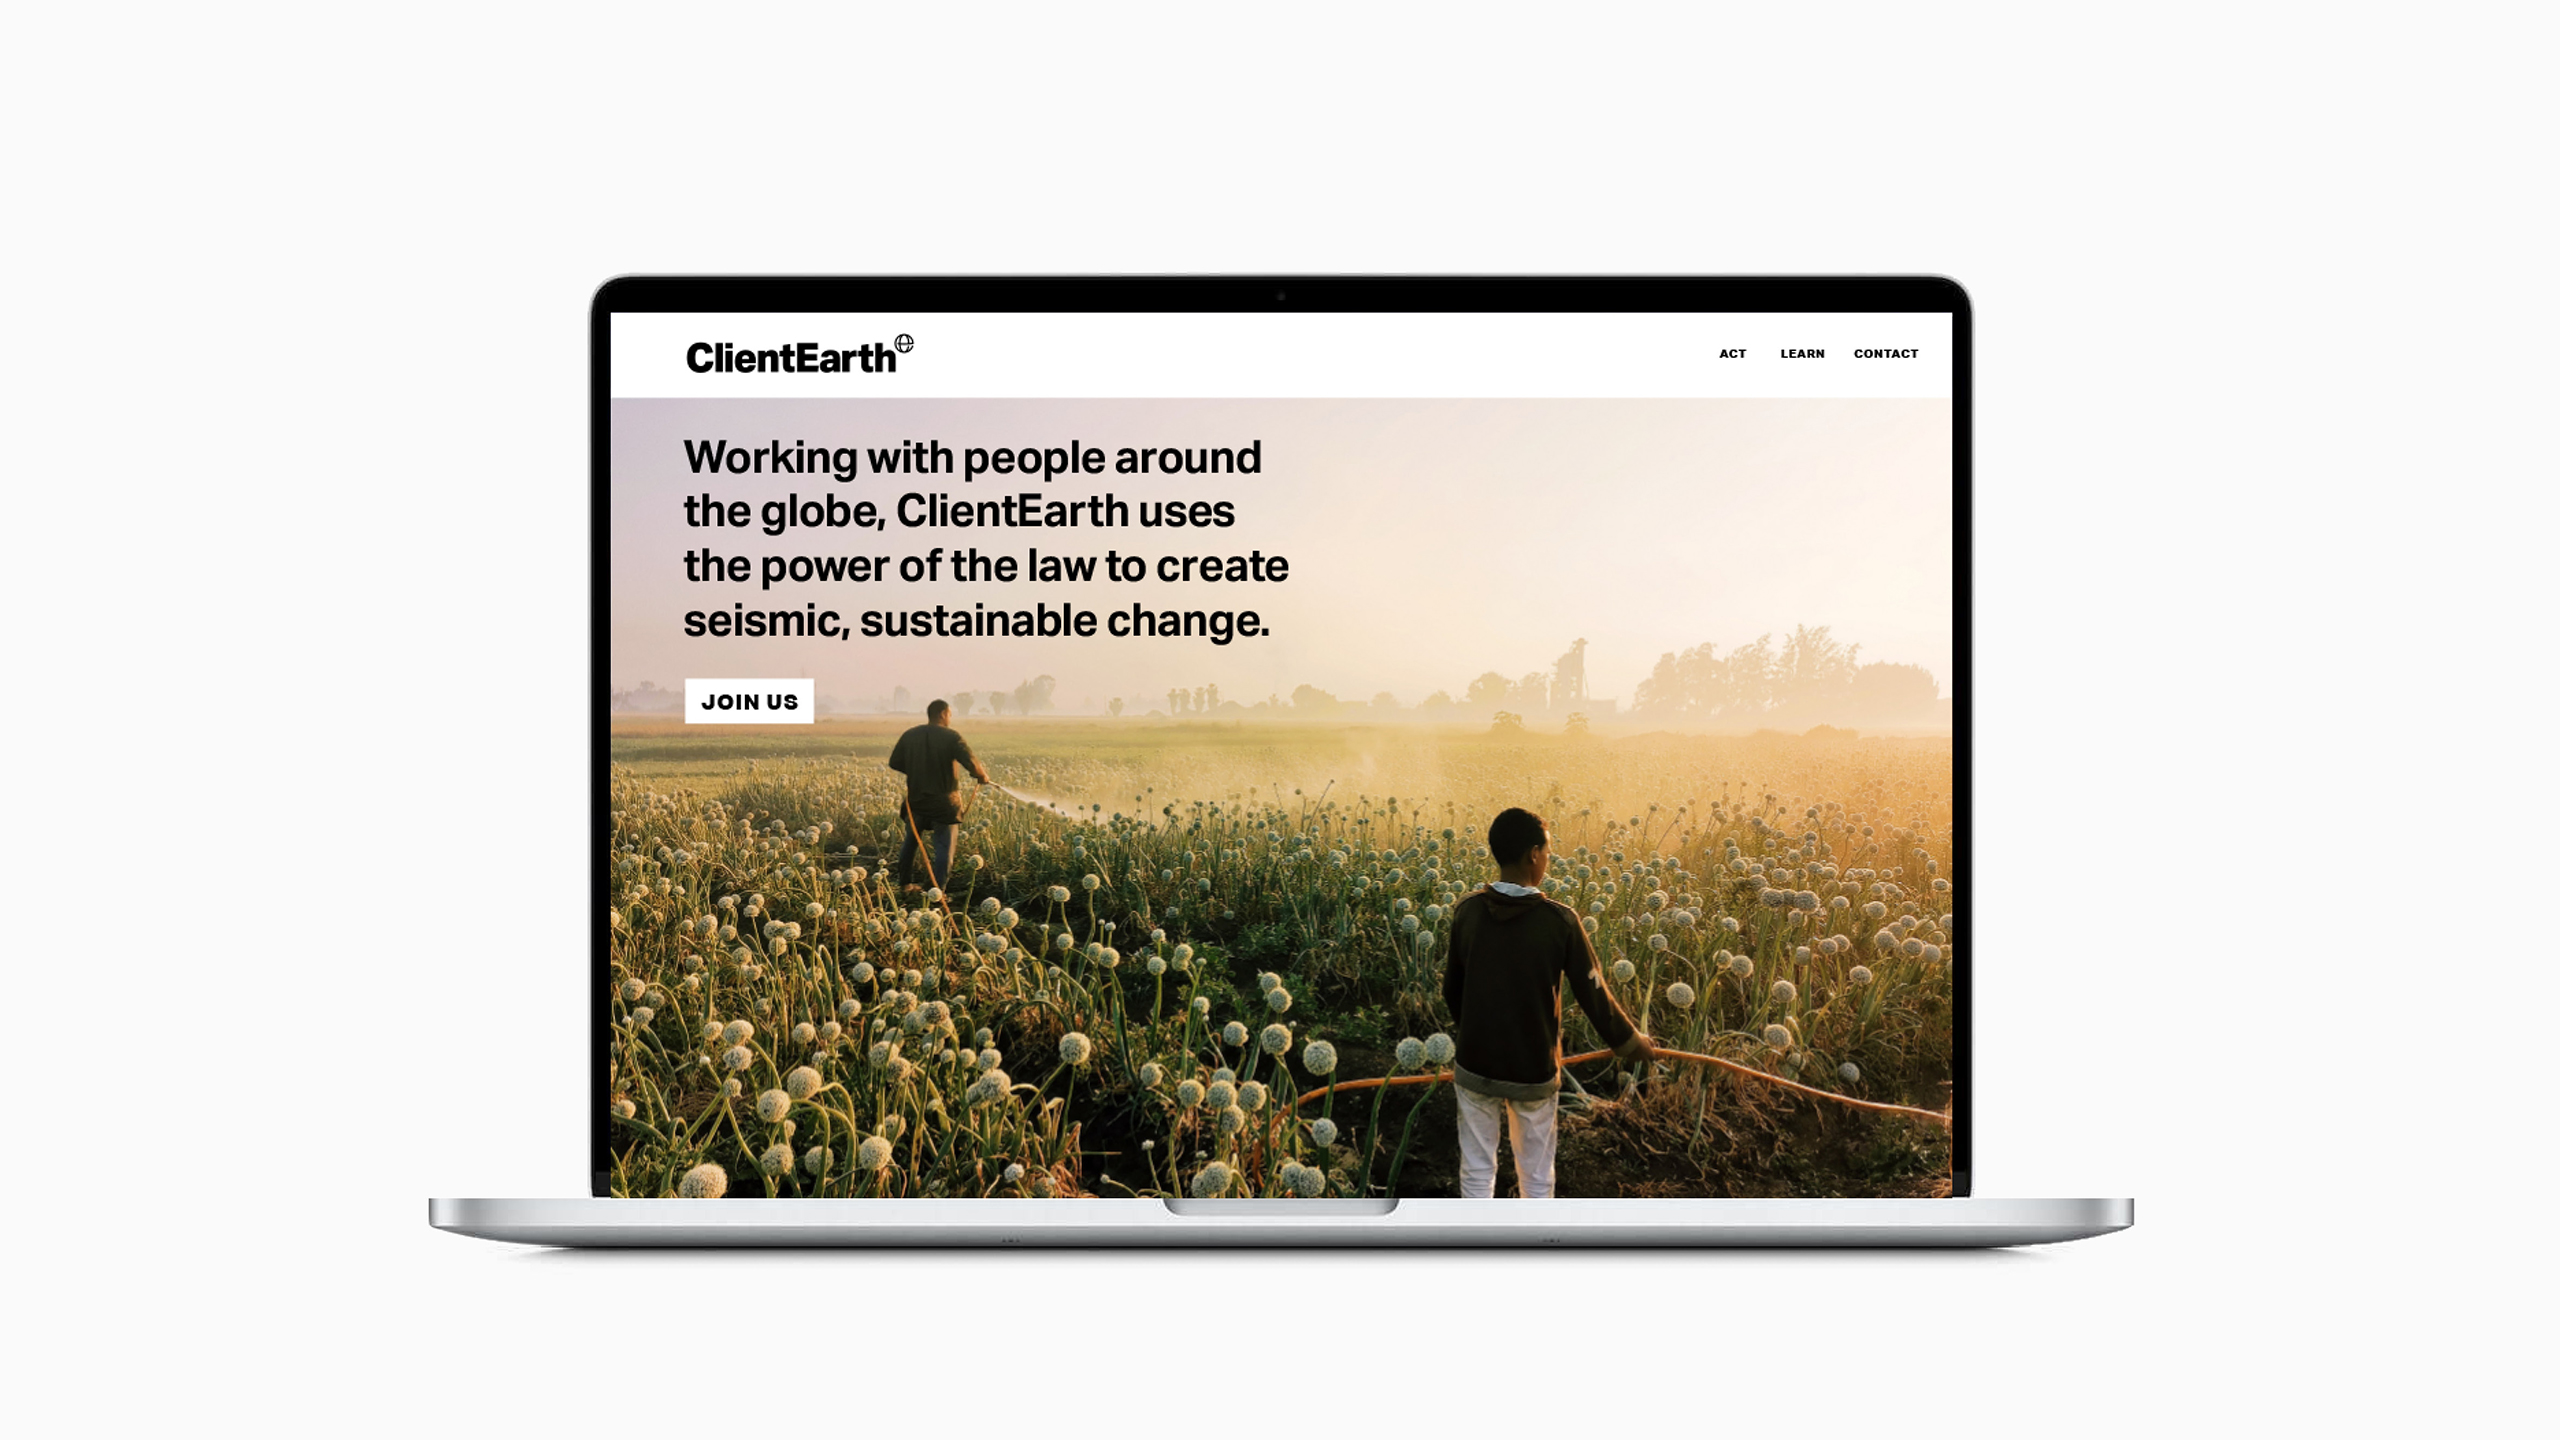 ClientEarth website.
Strategy and creative direction by Apropos. Design and art direction by Erica Dorn. Strategy and copywriting by Clare Aitken.